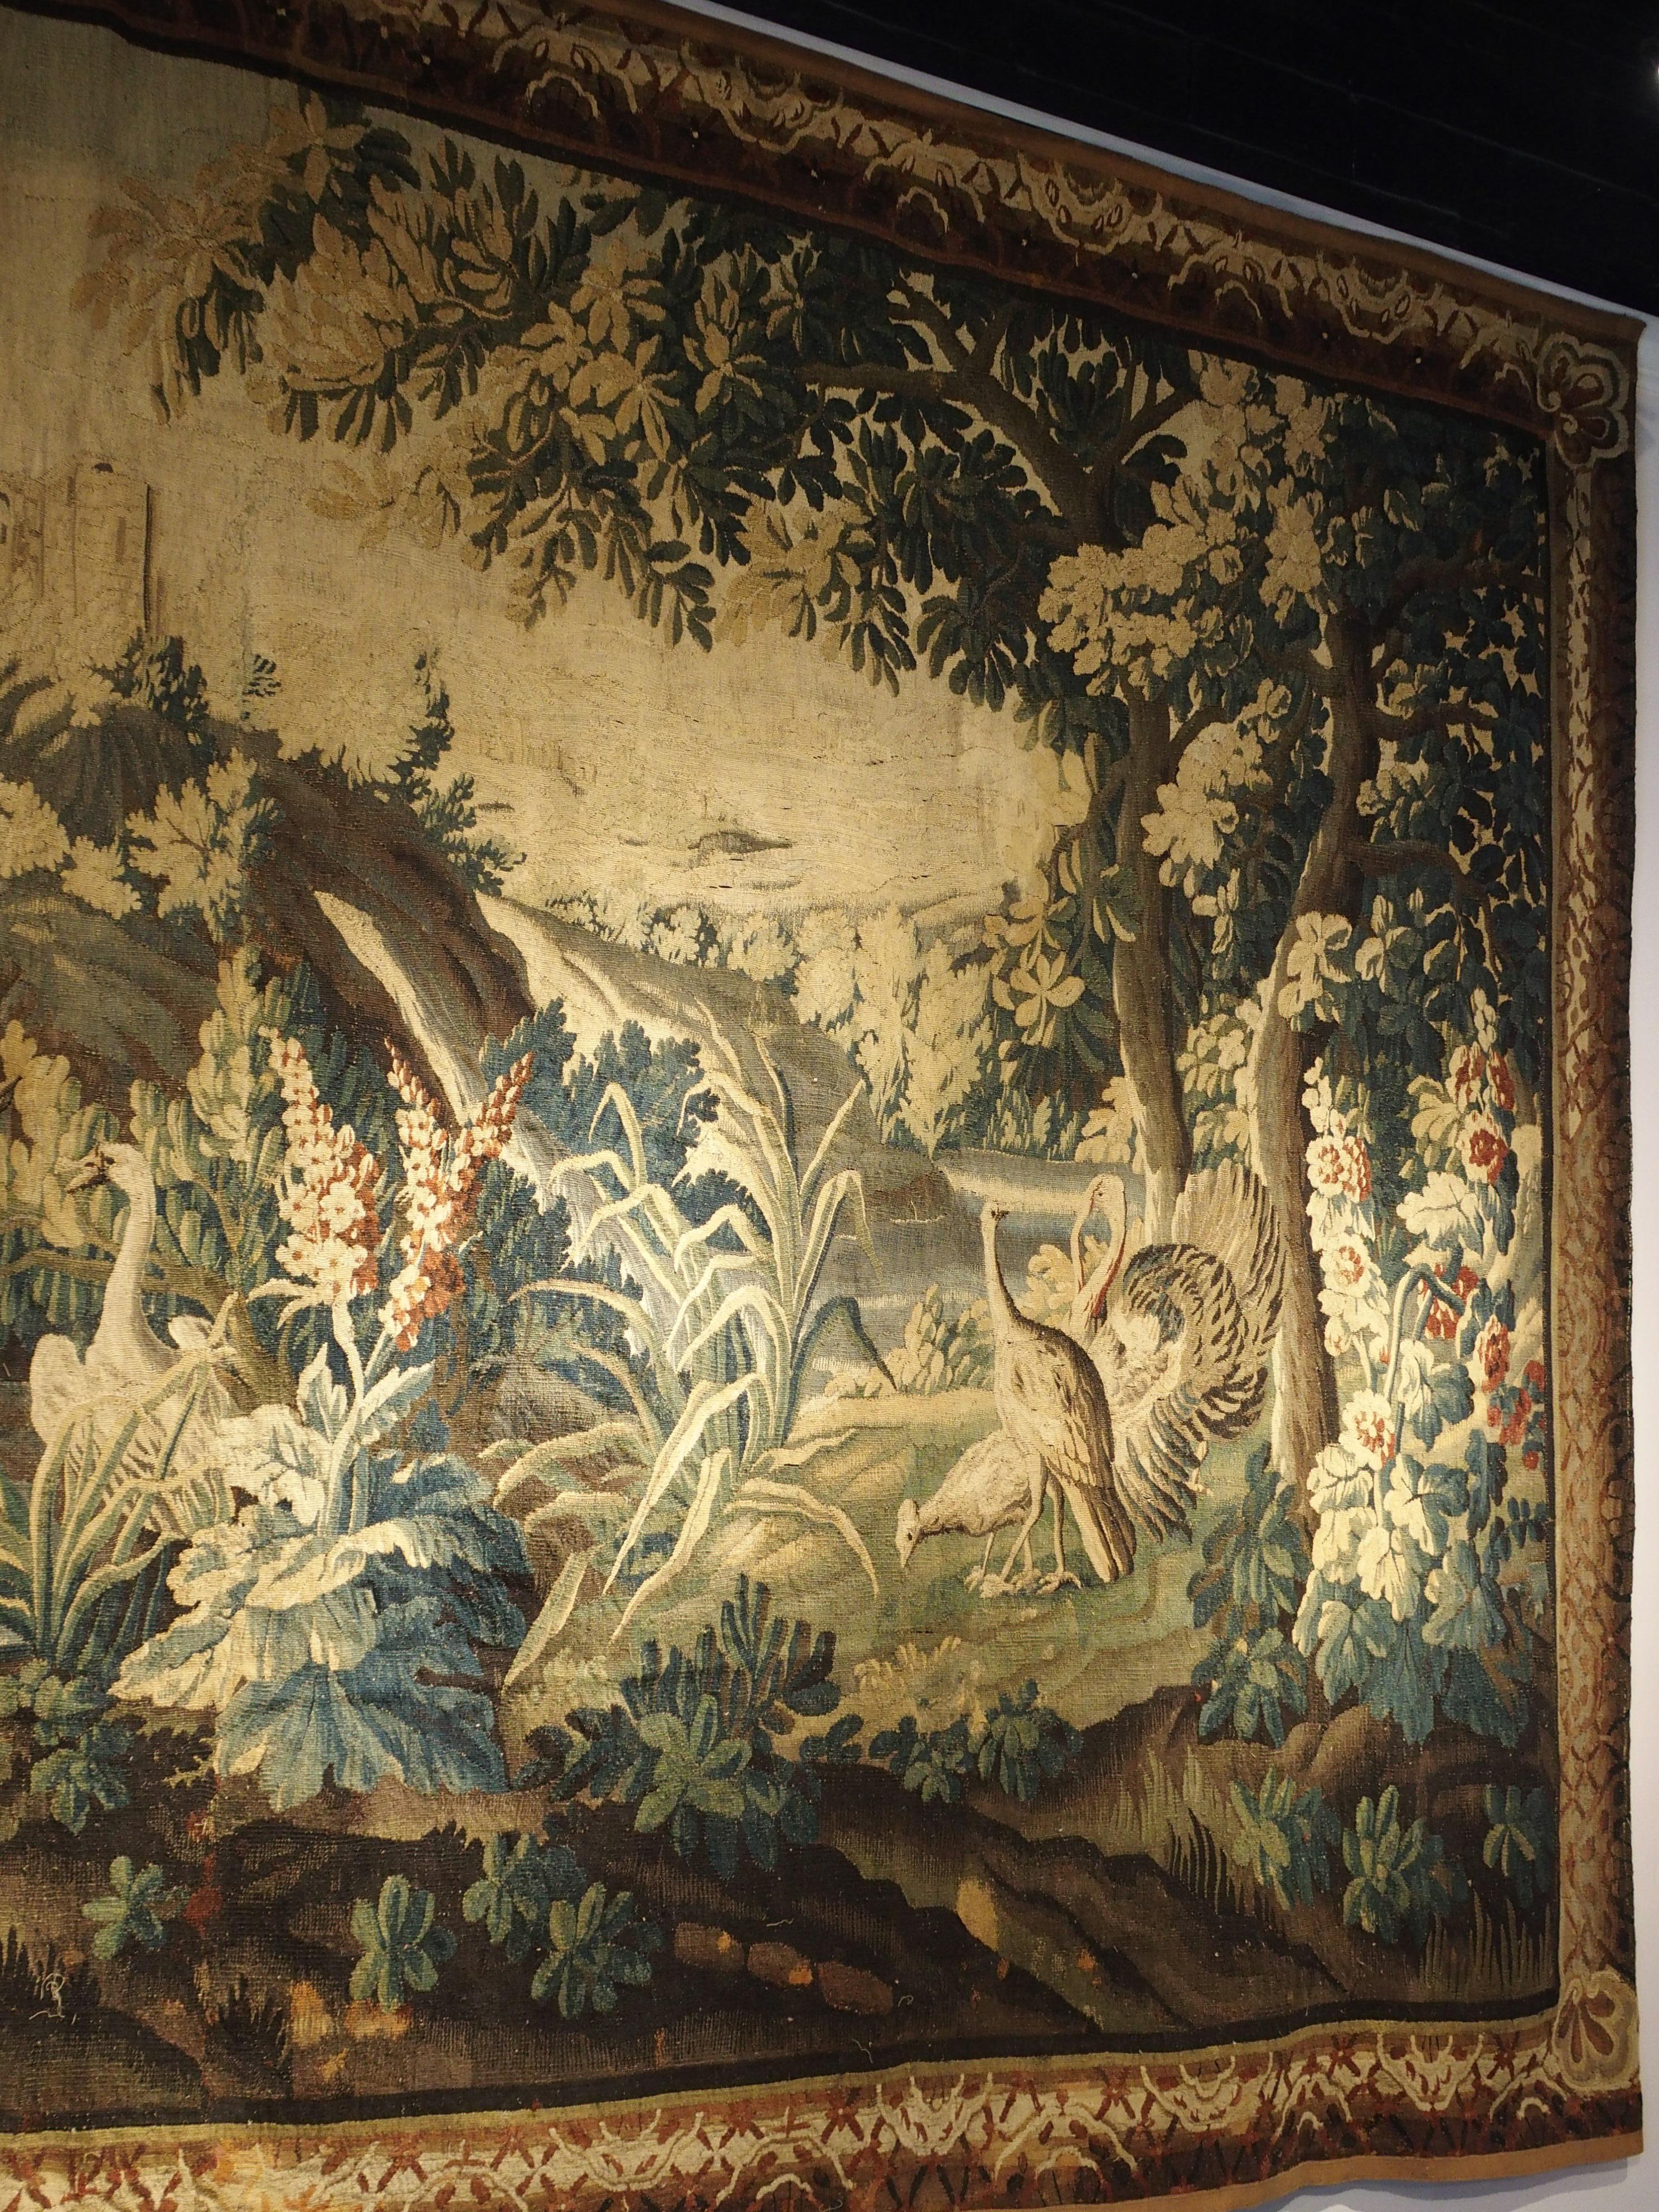 Hand-Woven Large 18th Century Wool and Silk Verdure Landscape Tapestry from Flanders